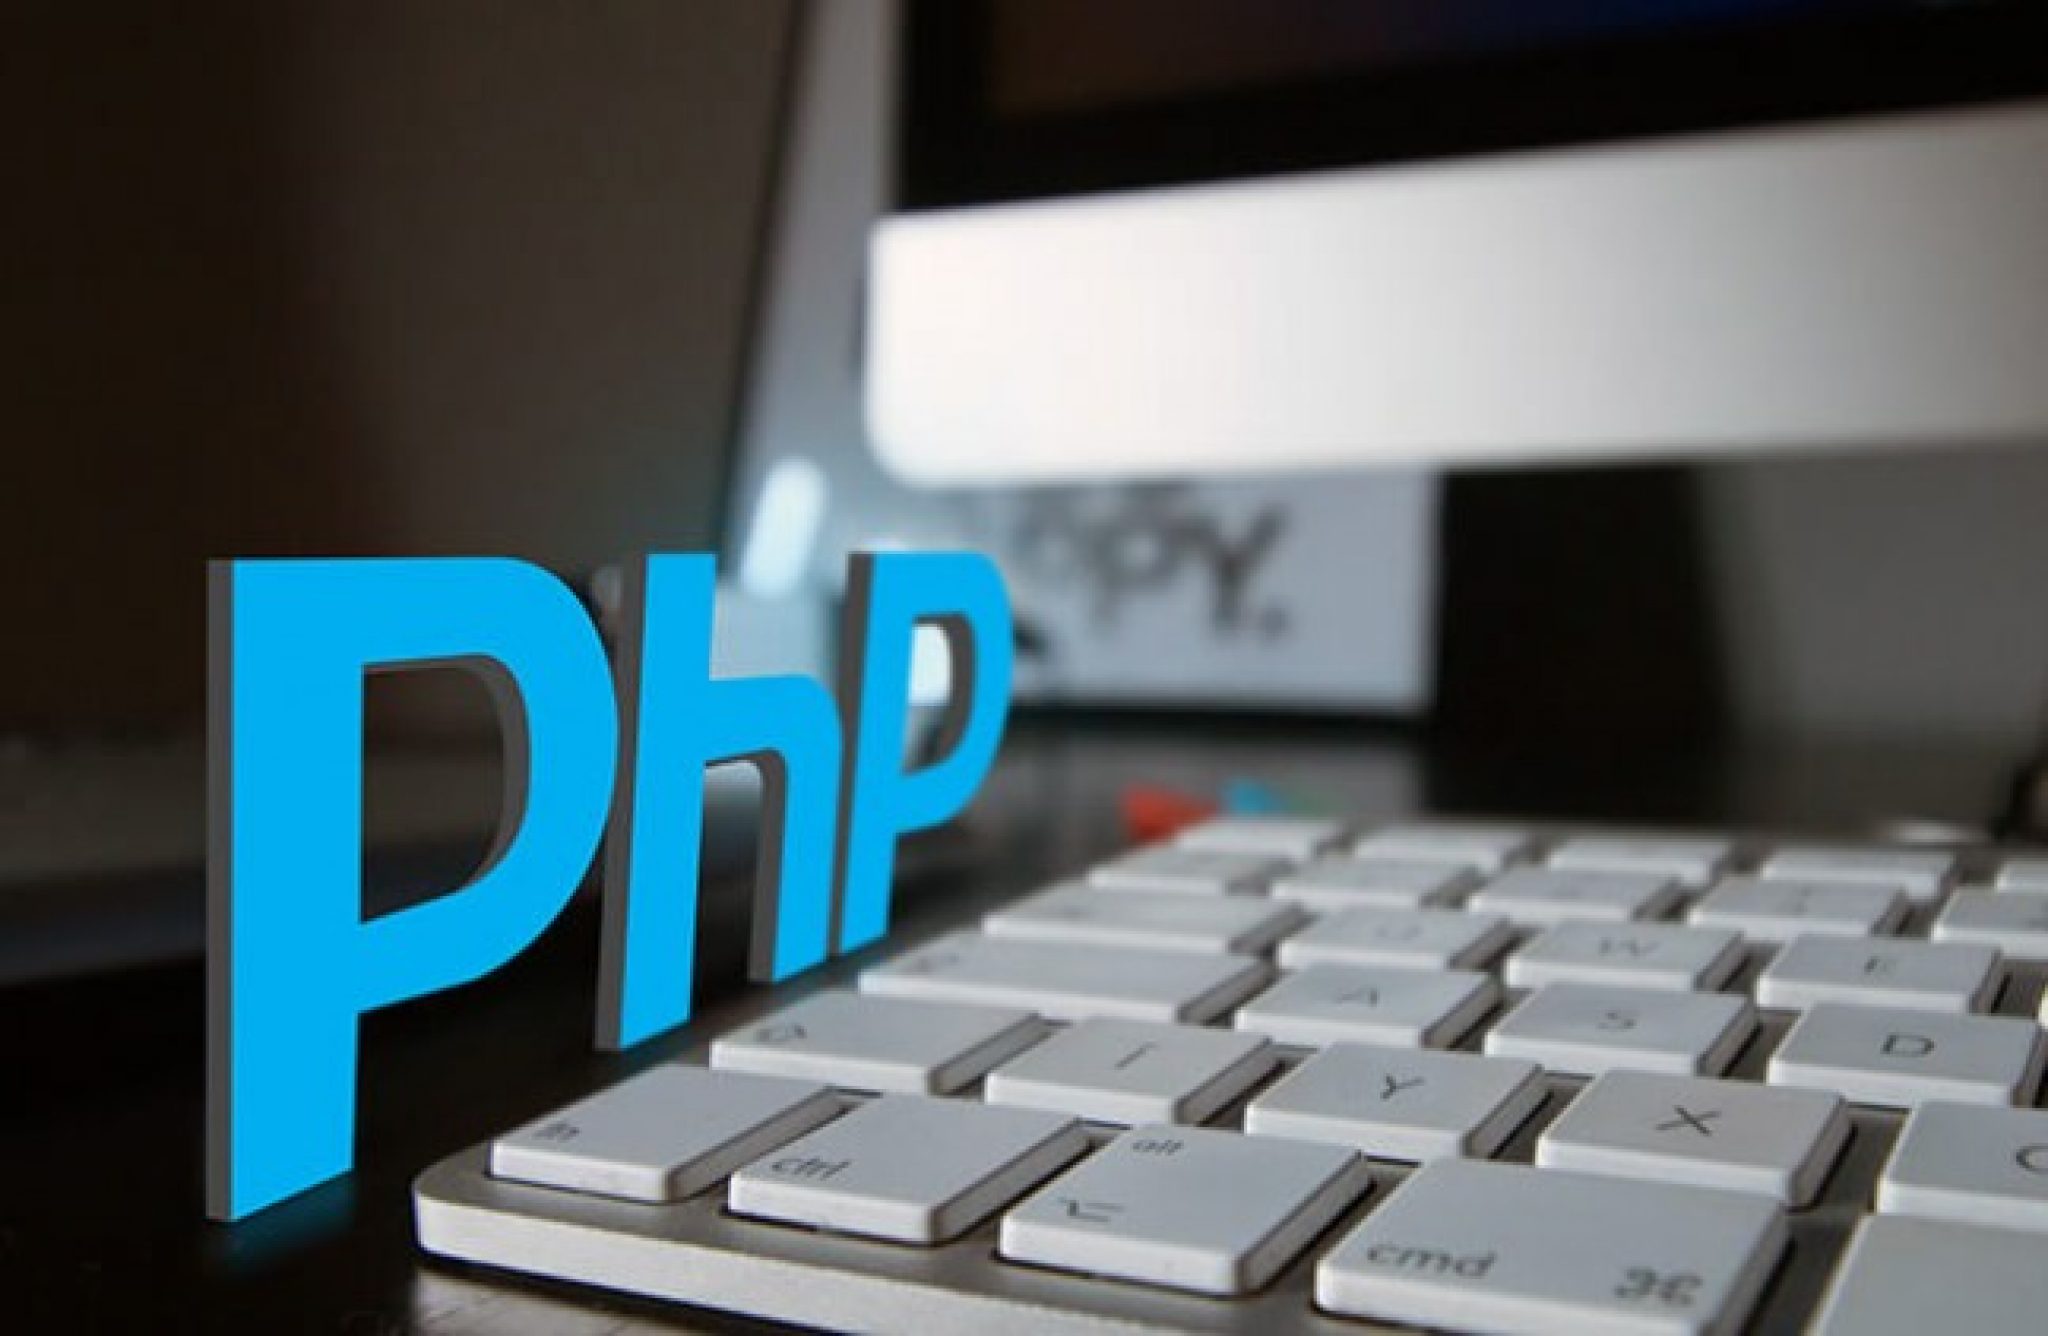 Php unique. Php обои. Php фото. Php заставка. Php разработка.